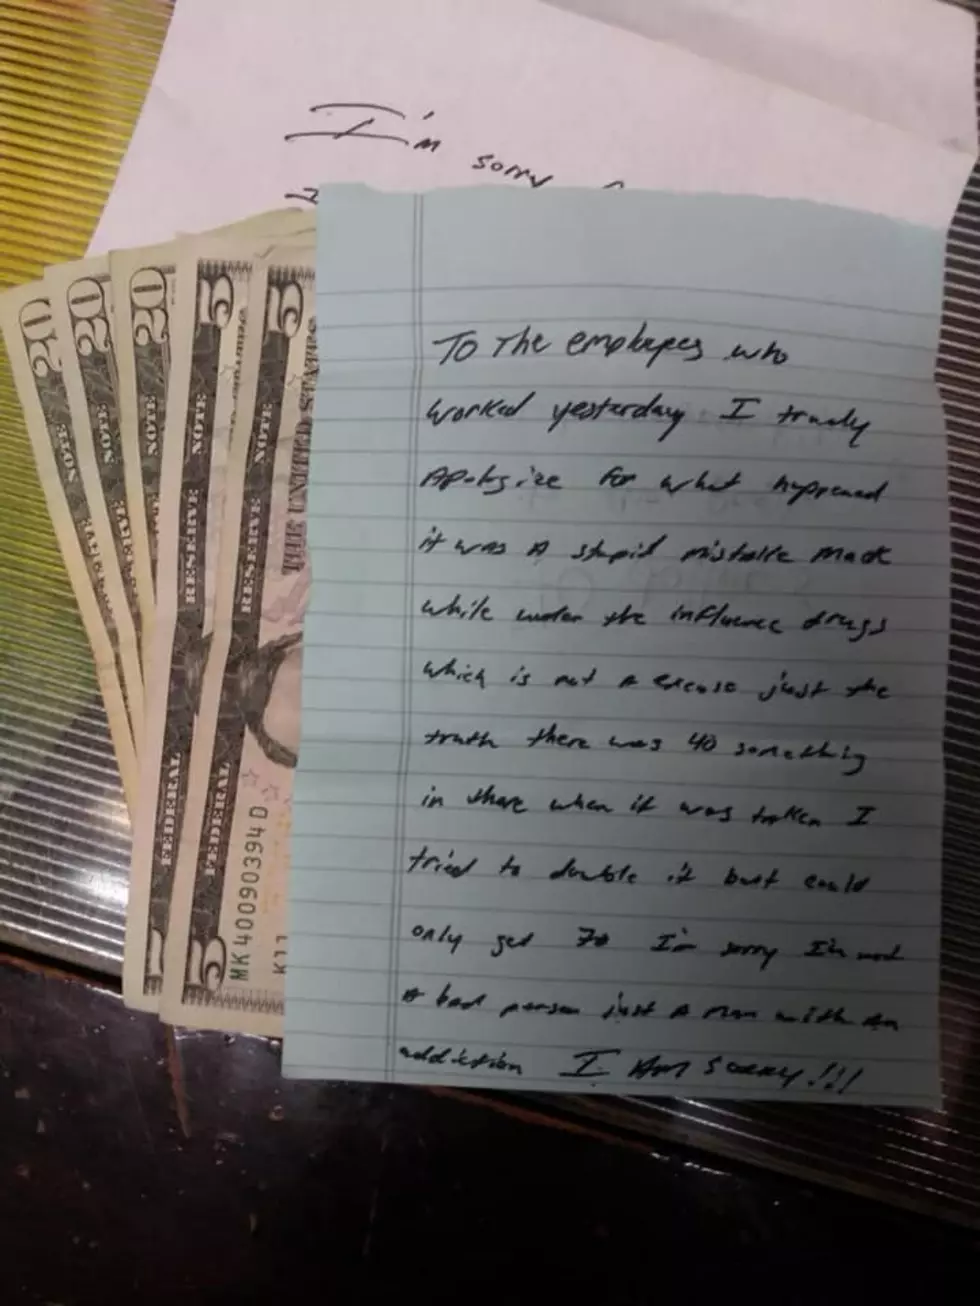 Thief Returns Stolen Money Along with Apology Note [Pic]